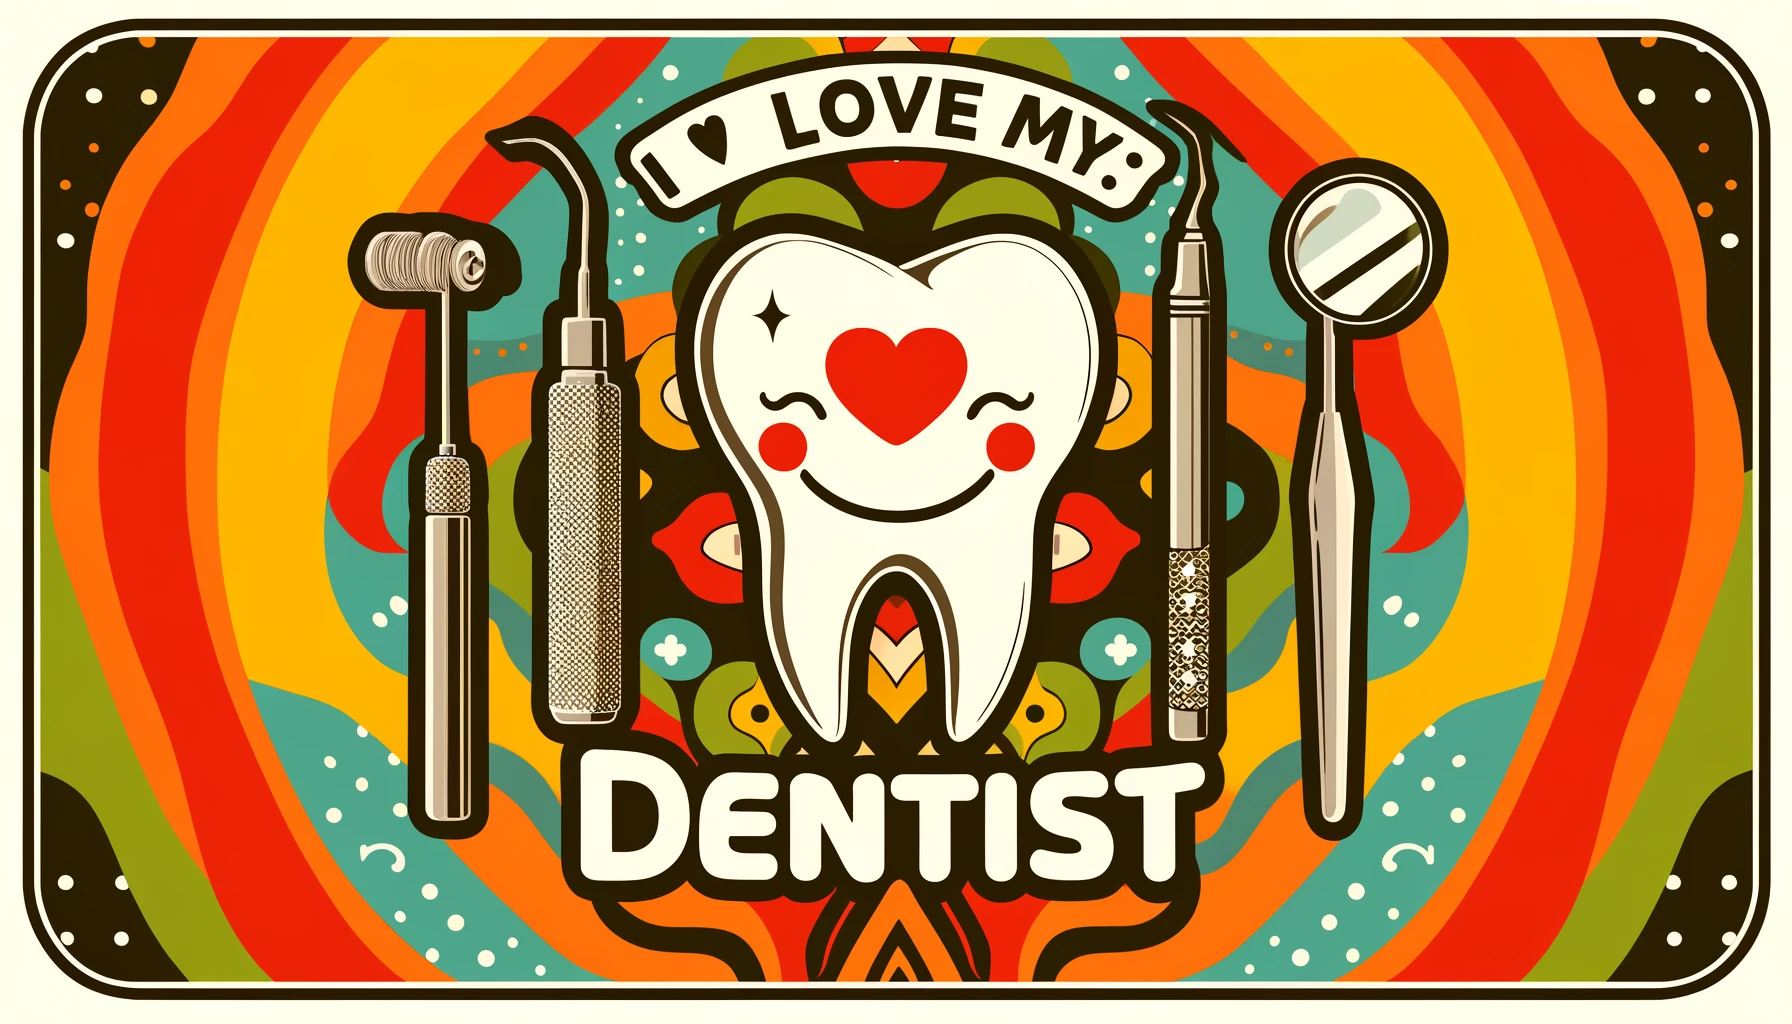 Grateful Quotes for I Love My Dentist Day Celebrations